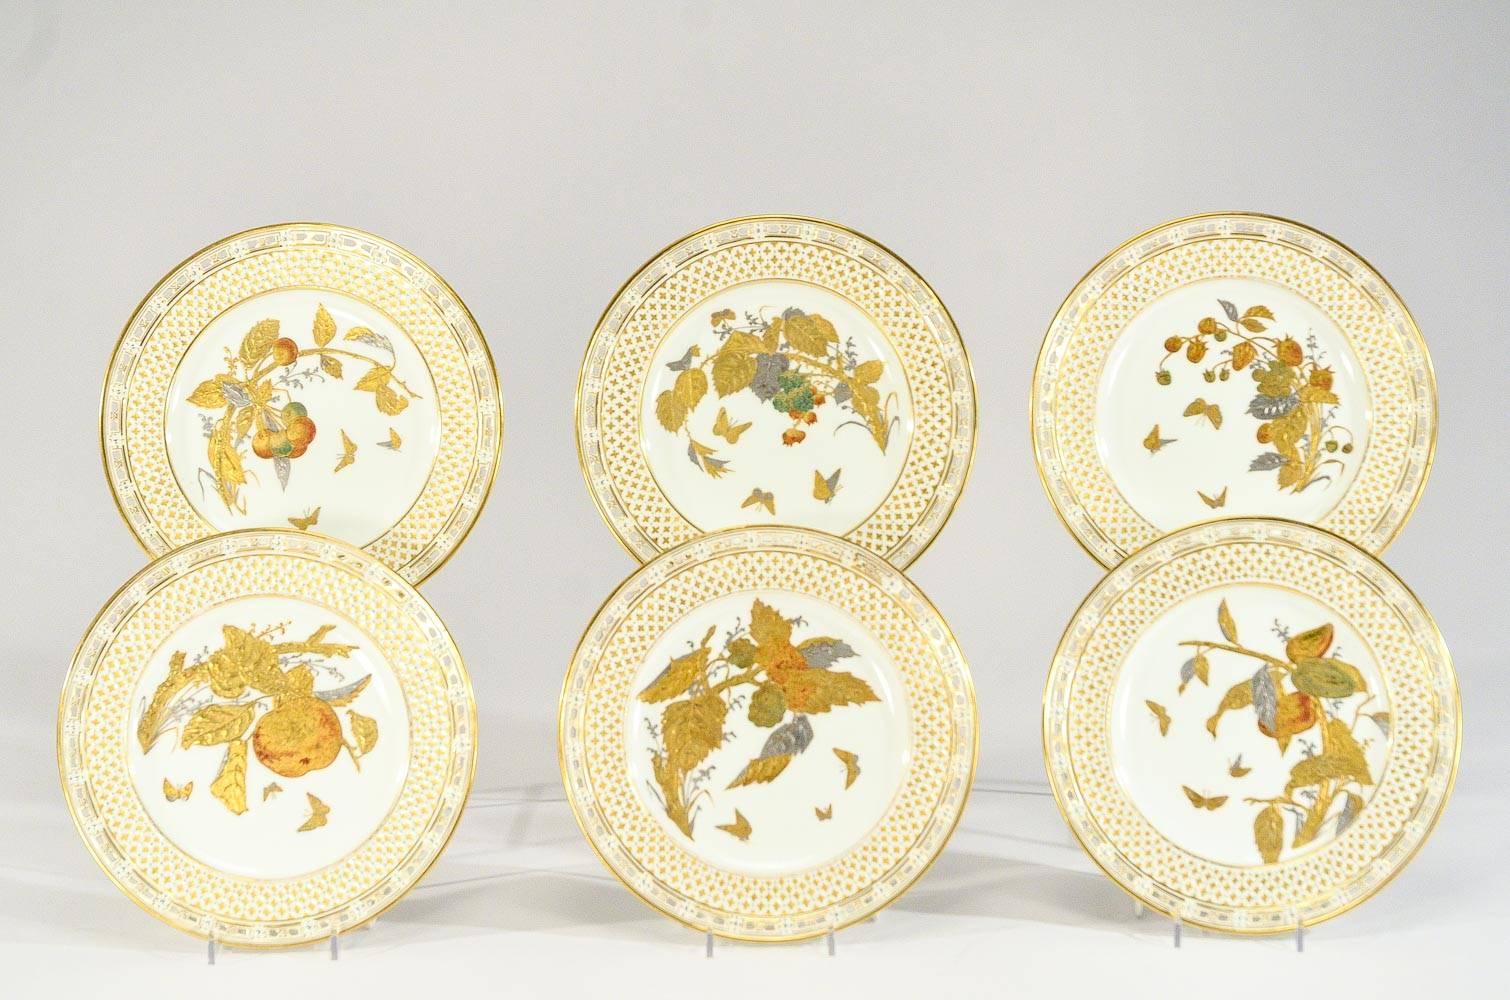 This set of 12 dessert plates is a fabulous example of the artistry of the Aesthetic Movement. Each plate is hand-painted in shades of raised paste gold, silver, green and apricot gilt and framed in a intricate latticework border trimmed in